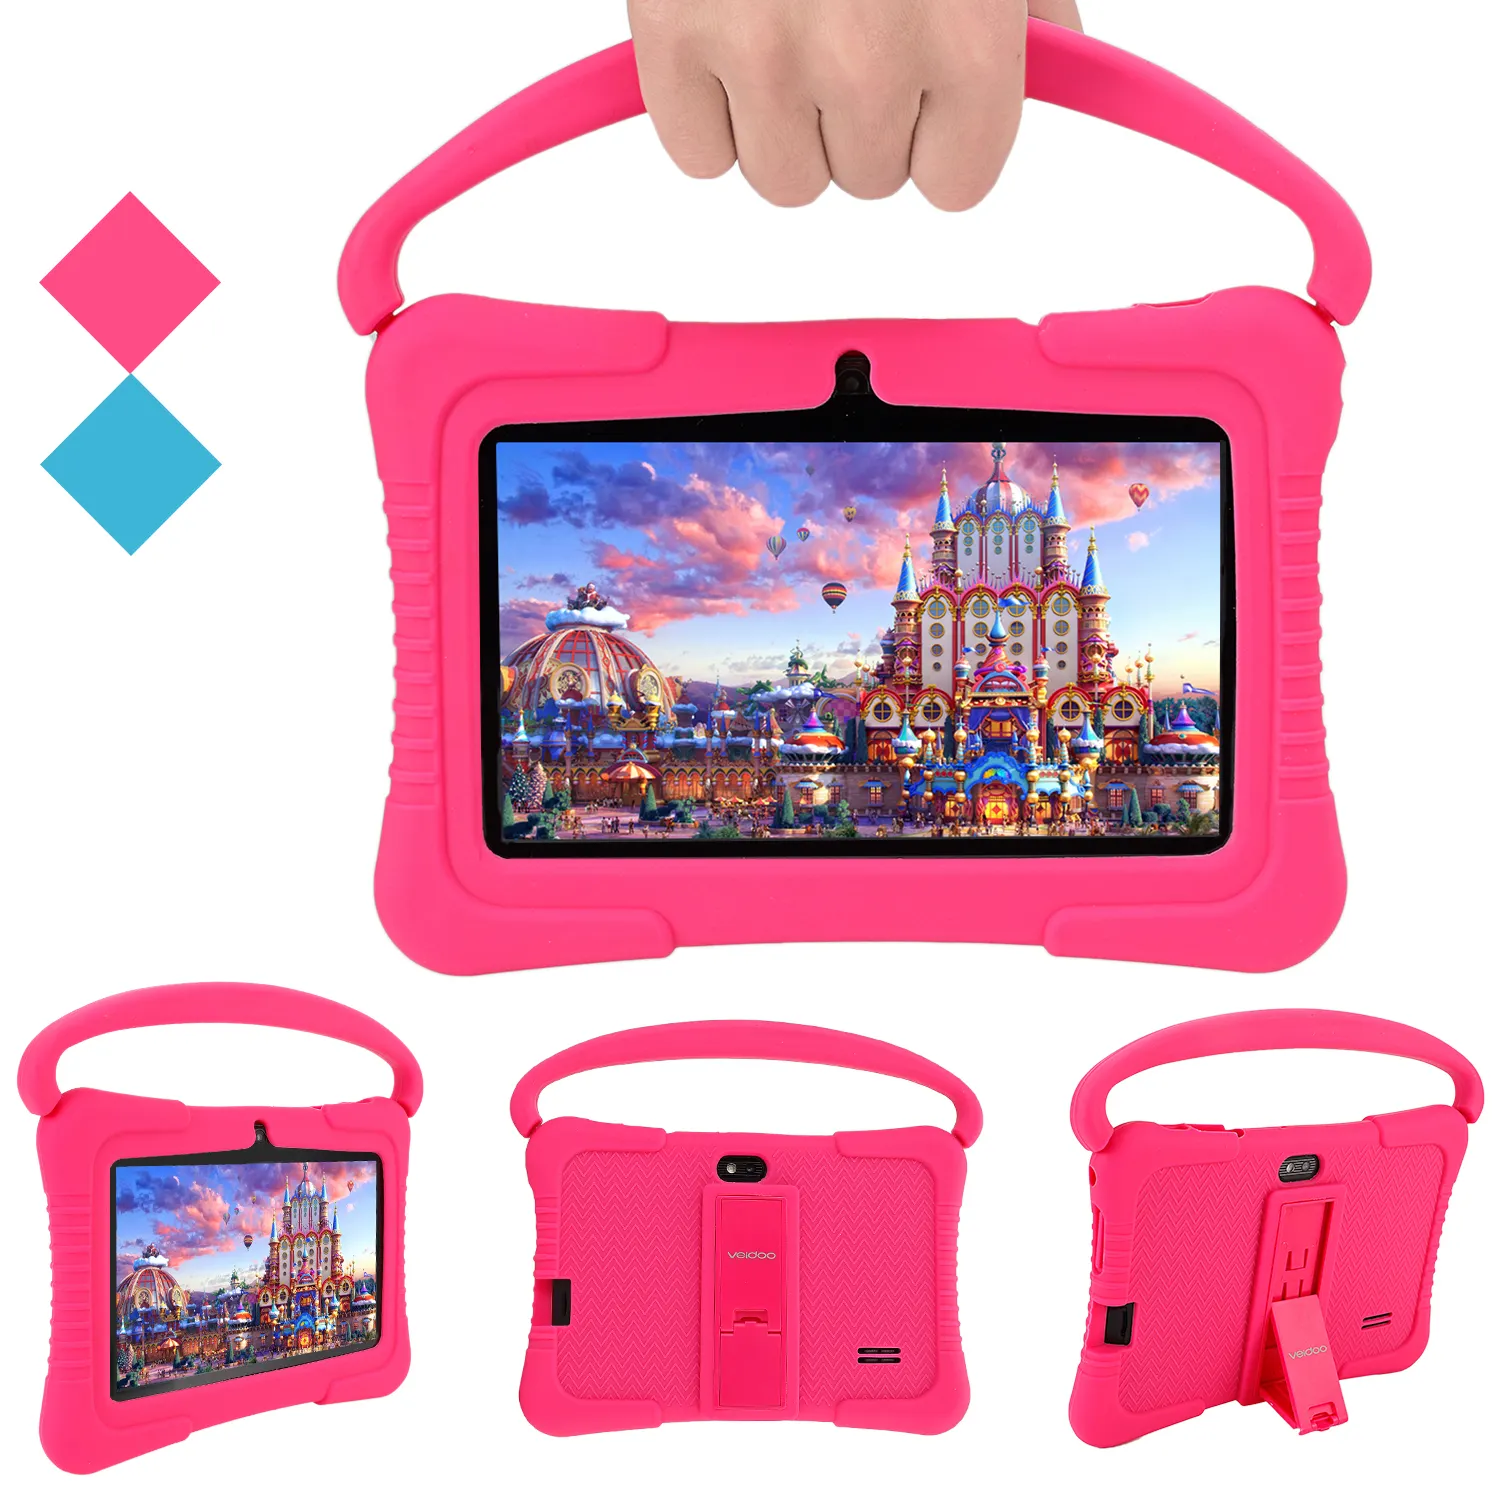 School Educational Kids 7inch Tanlet PC 1GB+16GB Android 6.0 Children Tablet with Many Kids Software